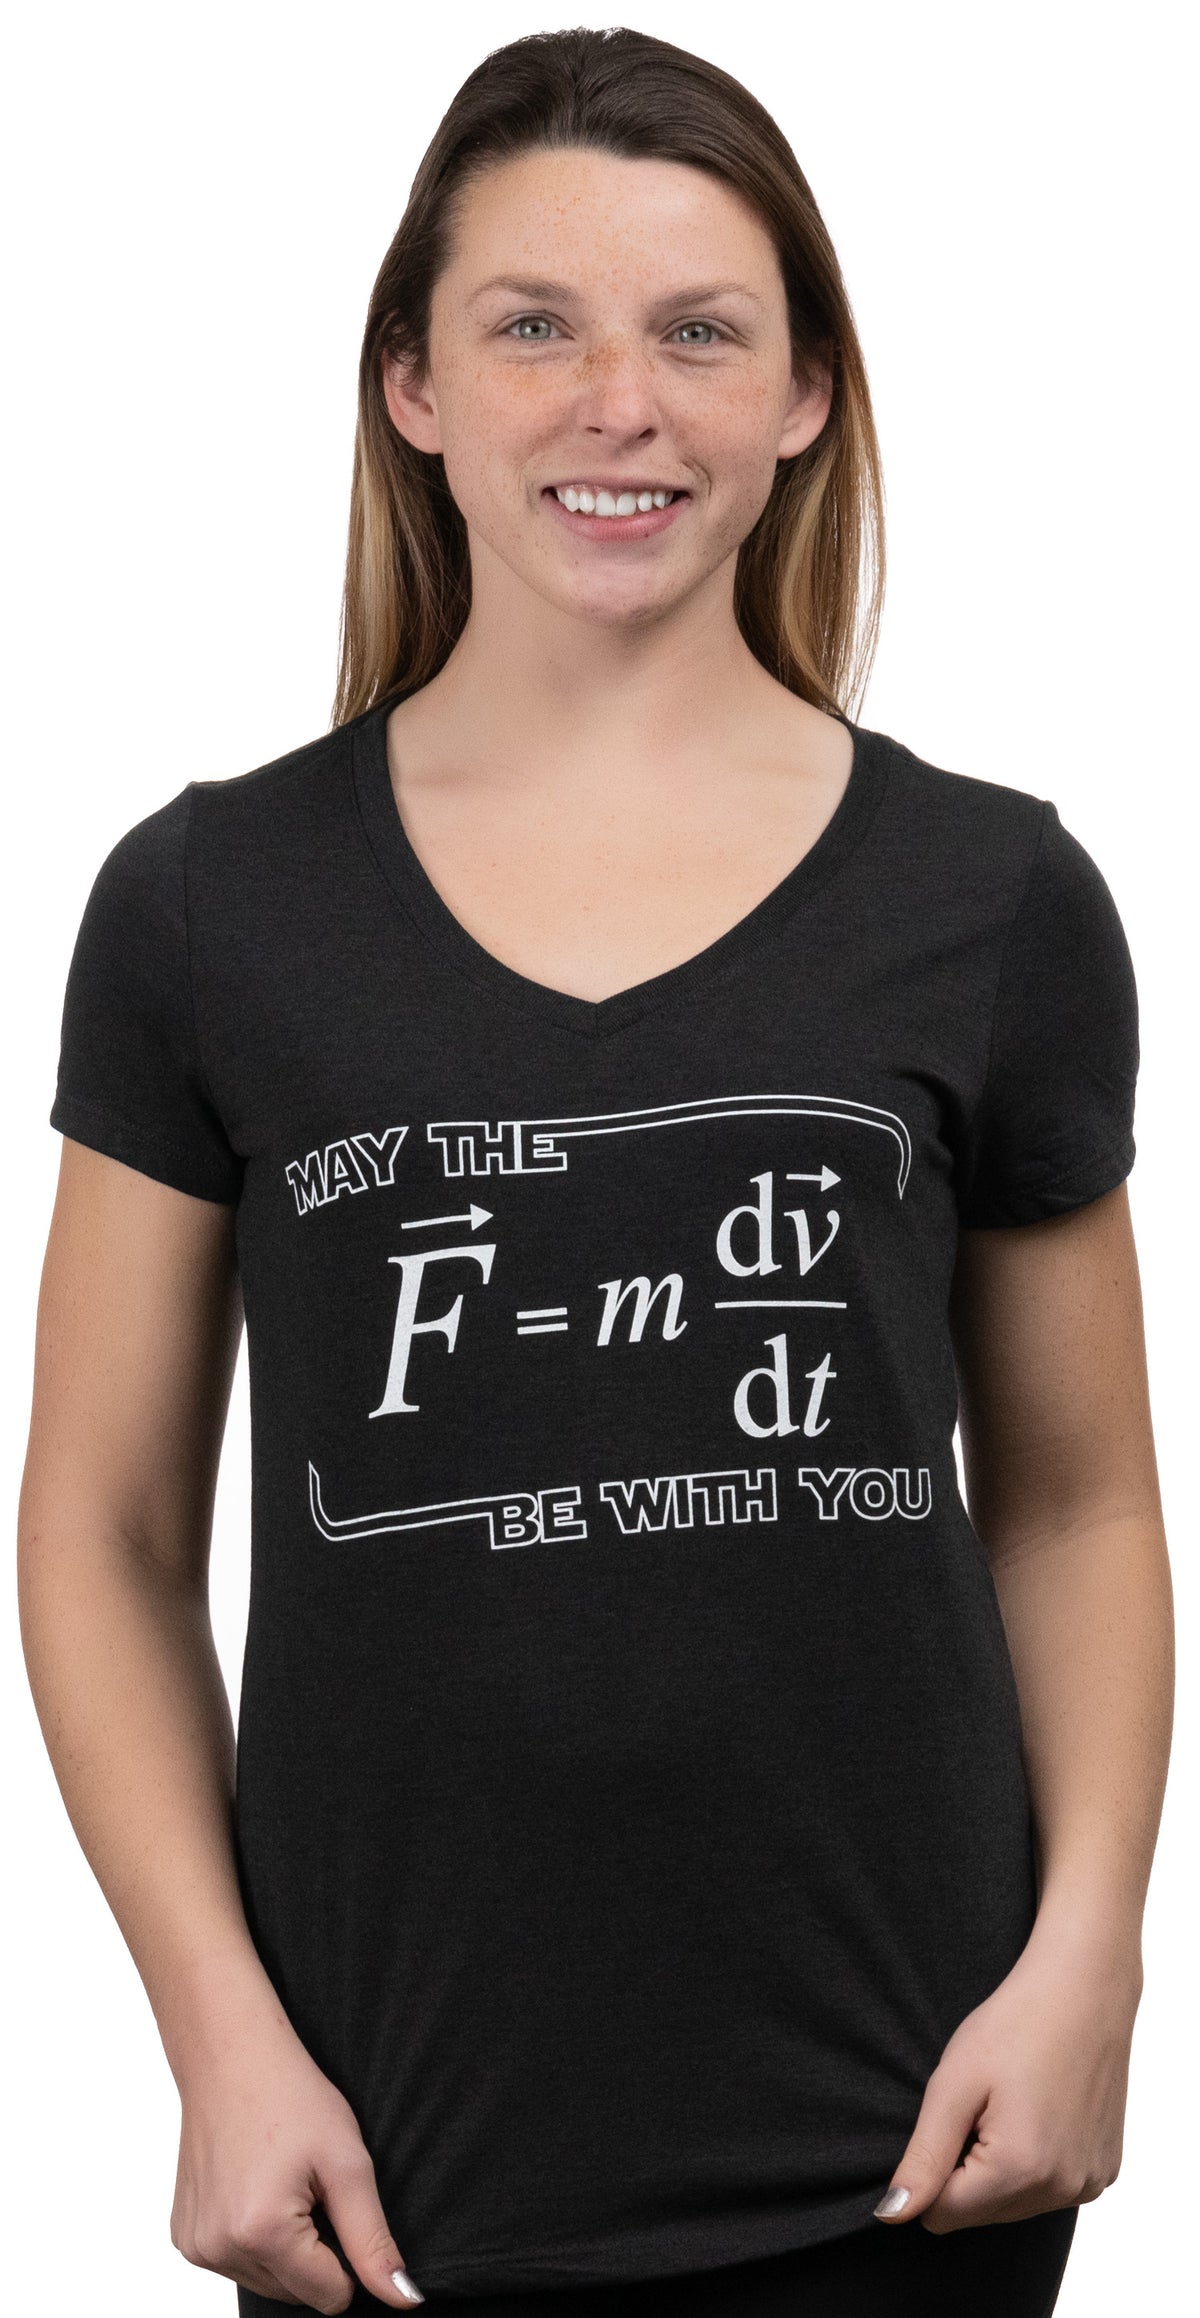 May The (F=m*dv/dt) Be with You | Funny Physics Science Women's T-Shirt